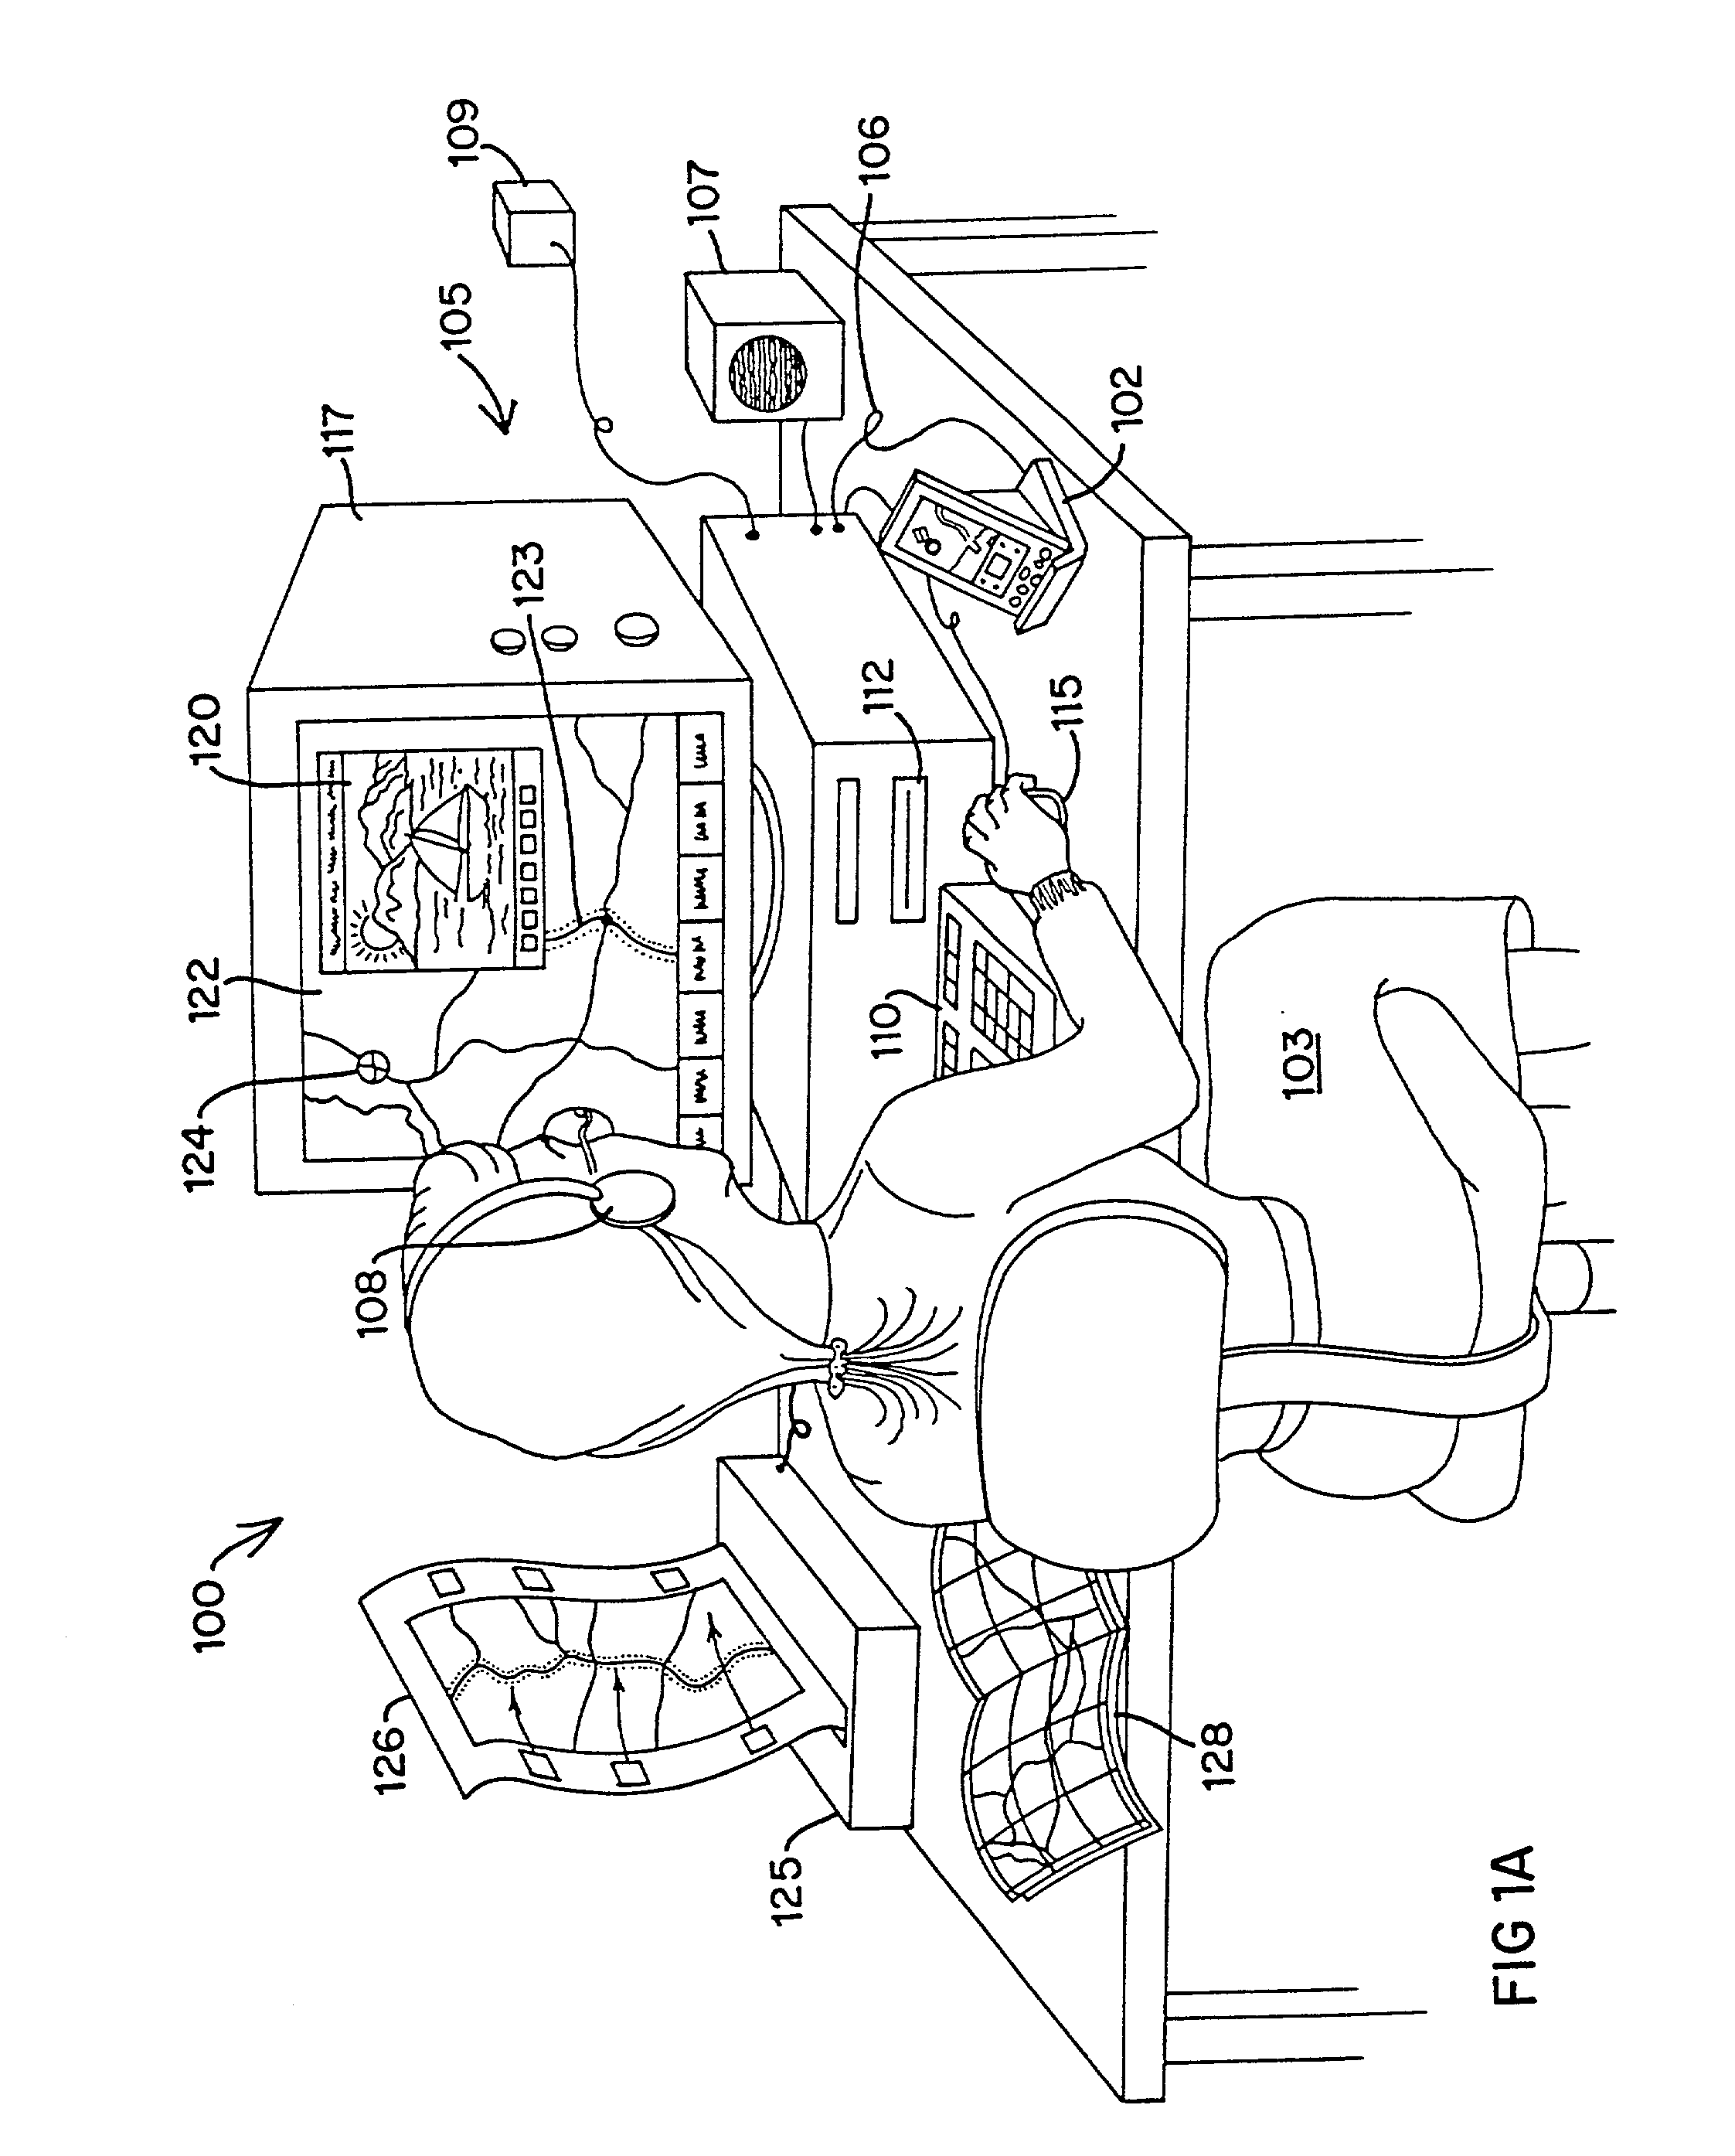 Integrated routing/mapping information system